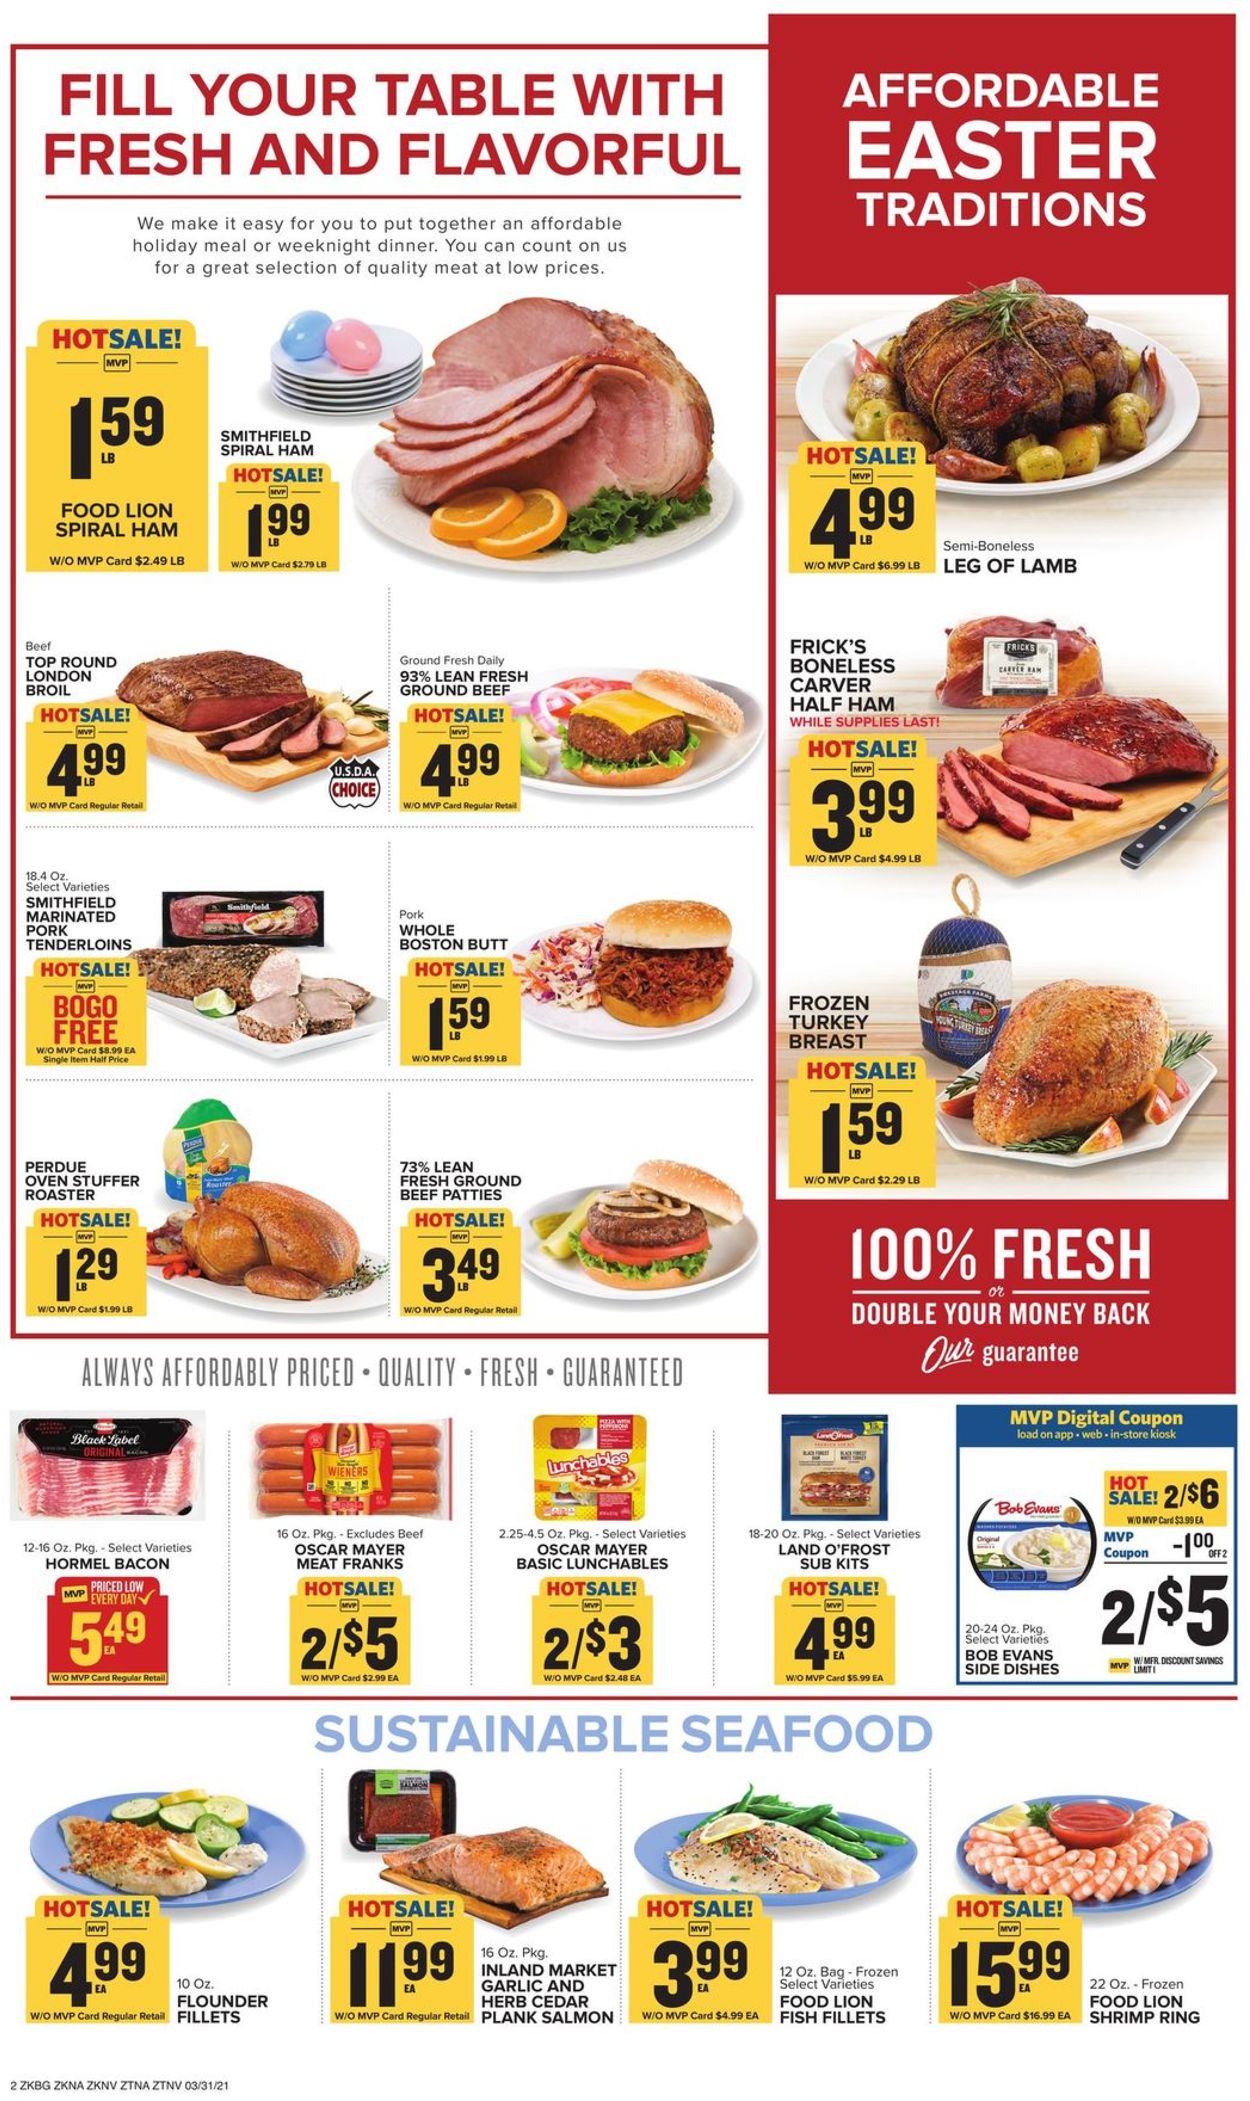 Food Lion Easter 2021 ad Weekly Ad Circular - valid 03/31-04/06/2021 (Page 3)